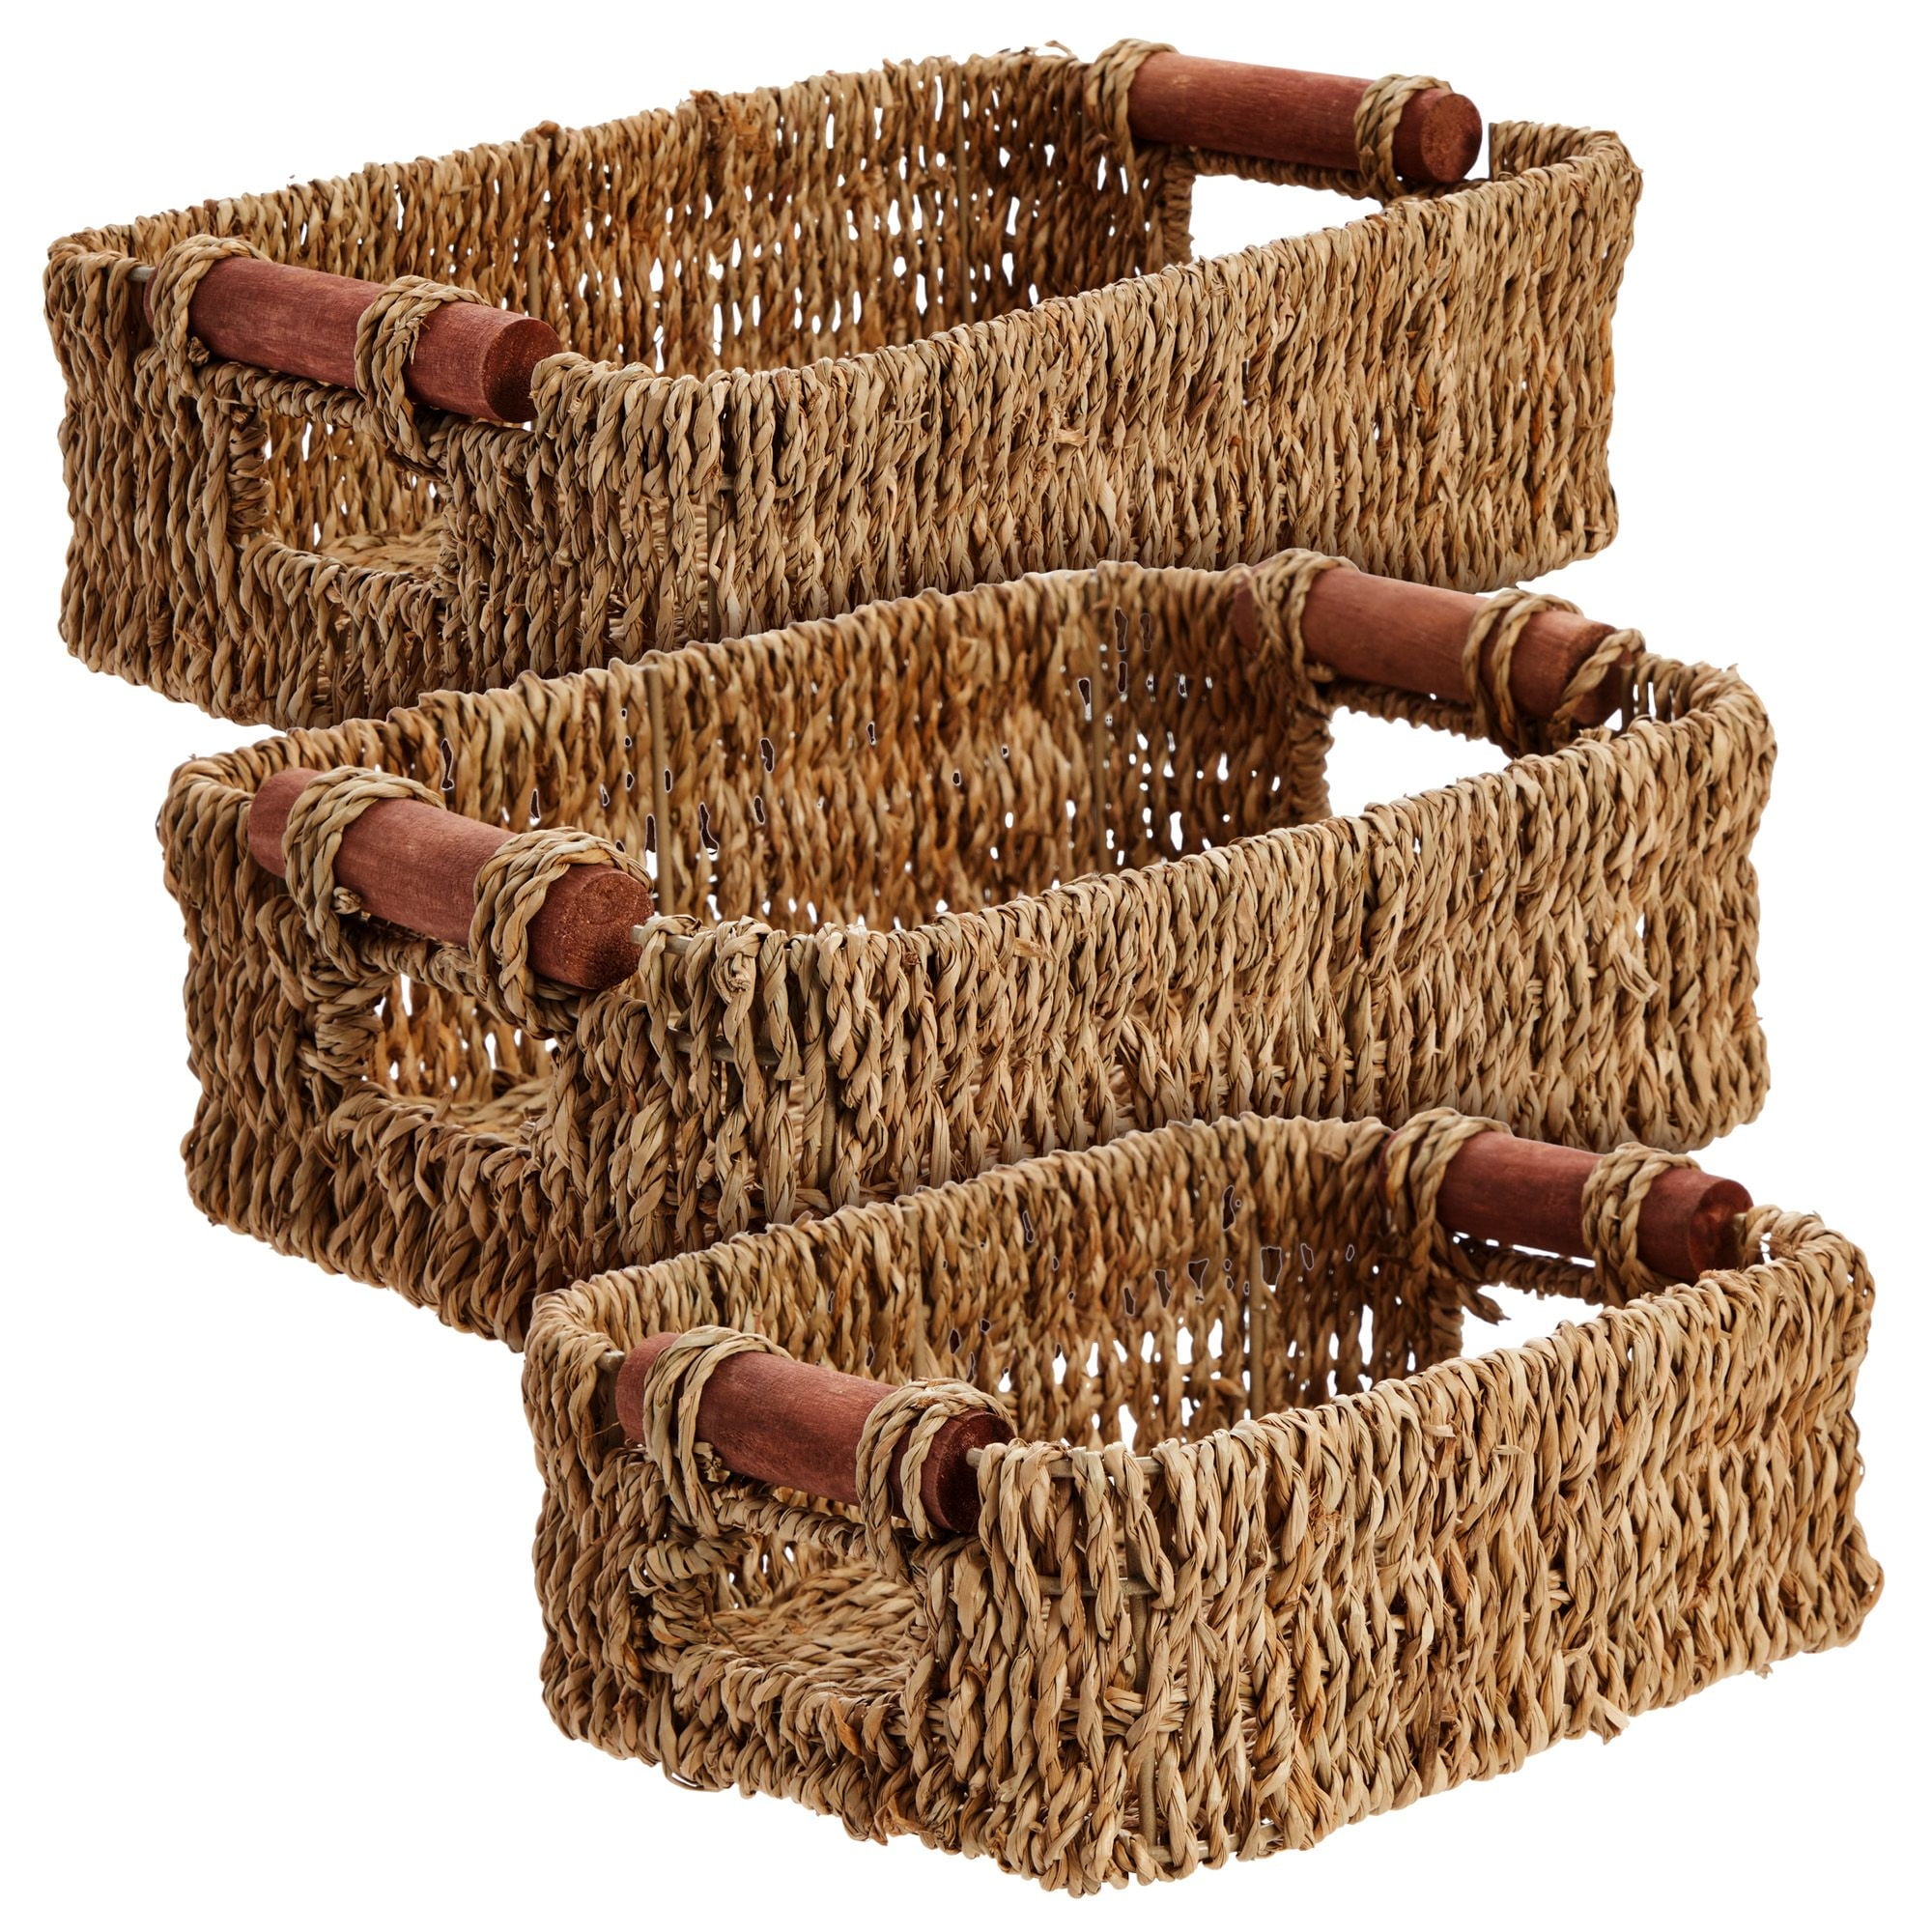 3-Pack 9 inch Square Wicker Storage Baskets with Liners - Small Woven Bins  for Organizing Kitchen, Closet Shelves, Bathroom, Laundry